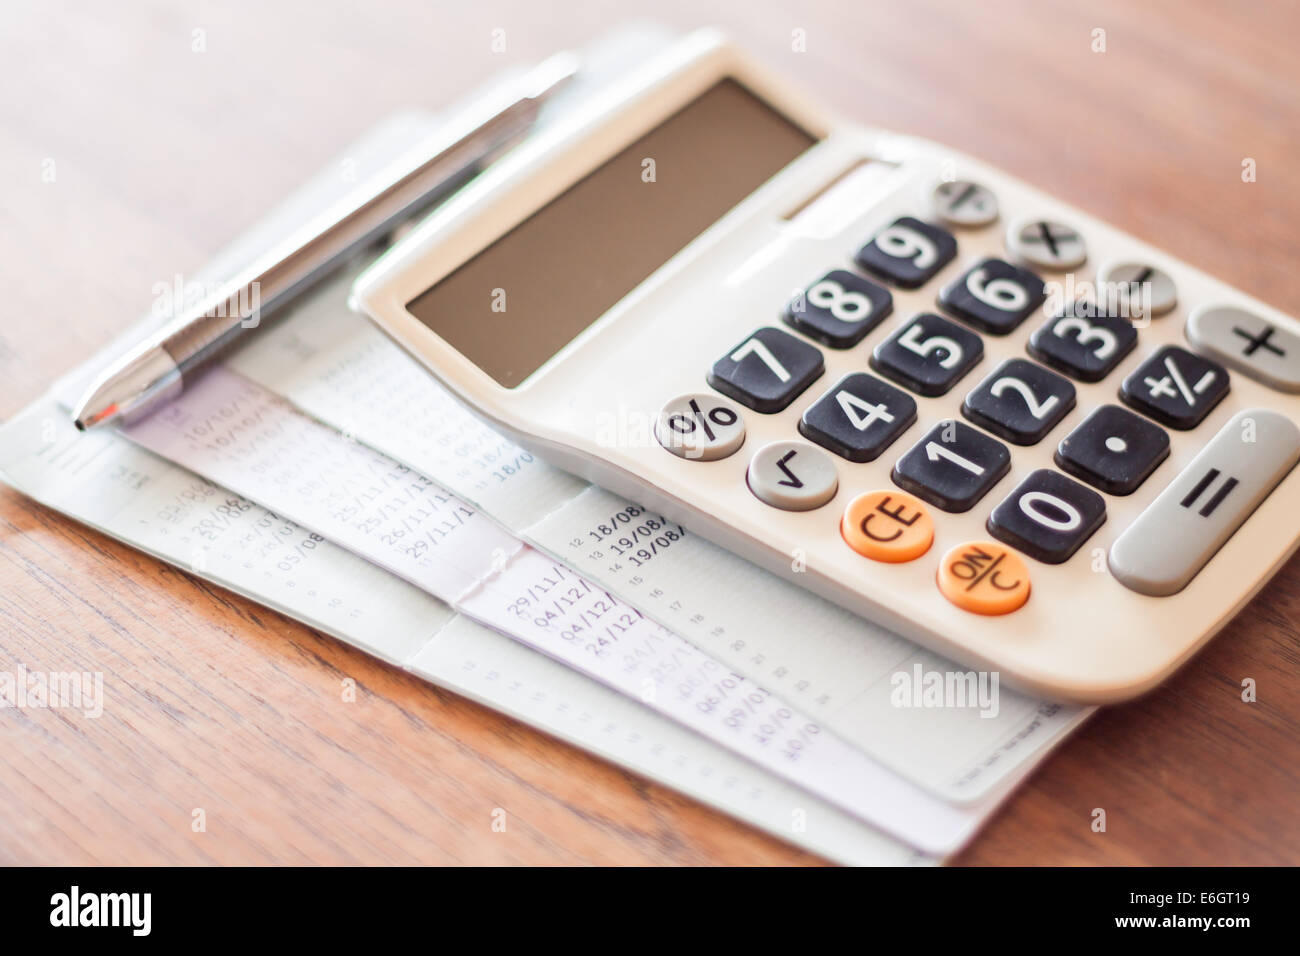 Calculator and pen with bank account passbook, stock photo Stock Photo